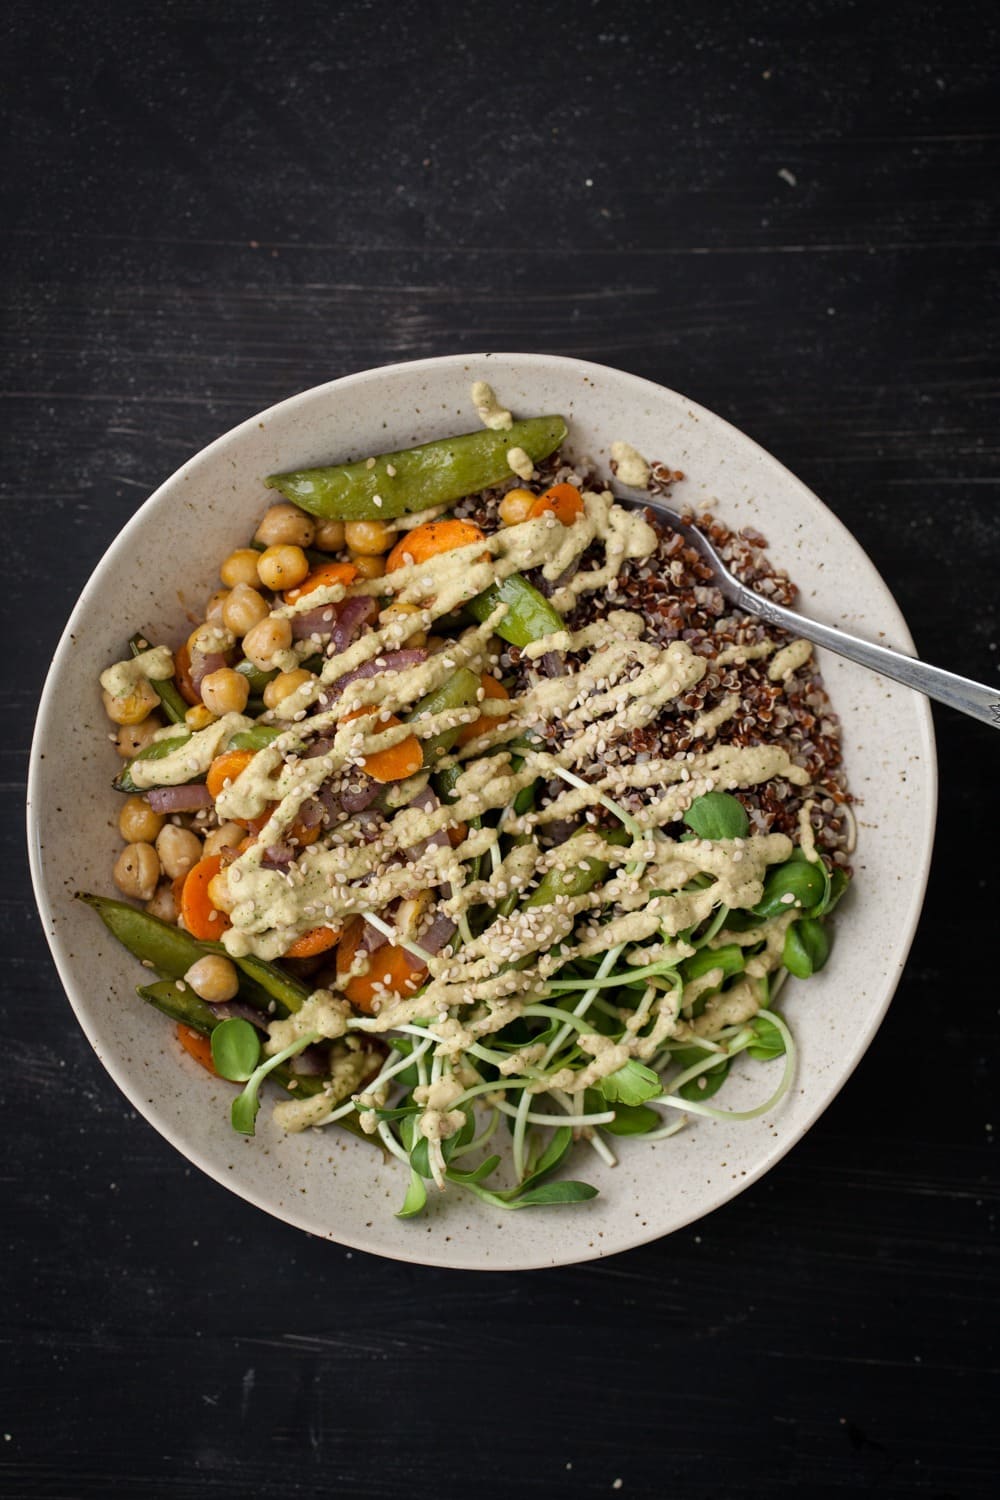 Chickpea Bowl with Roasted Vegetables and Cilantro Cashew Cream